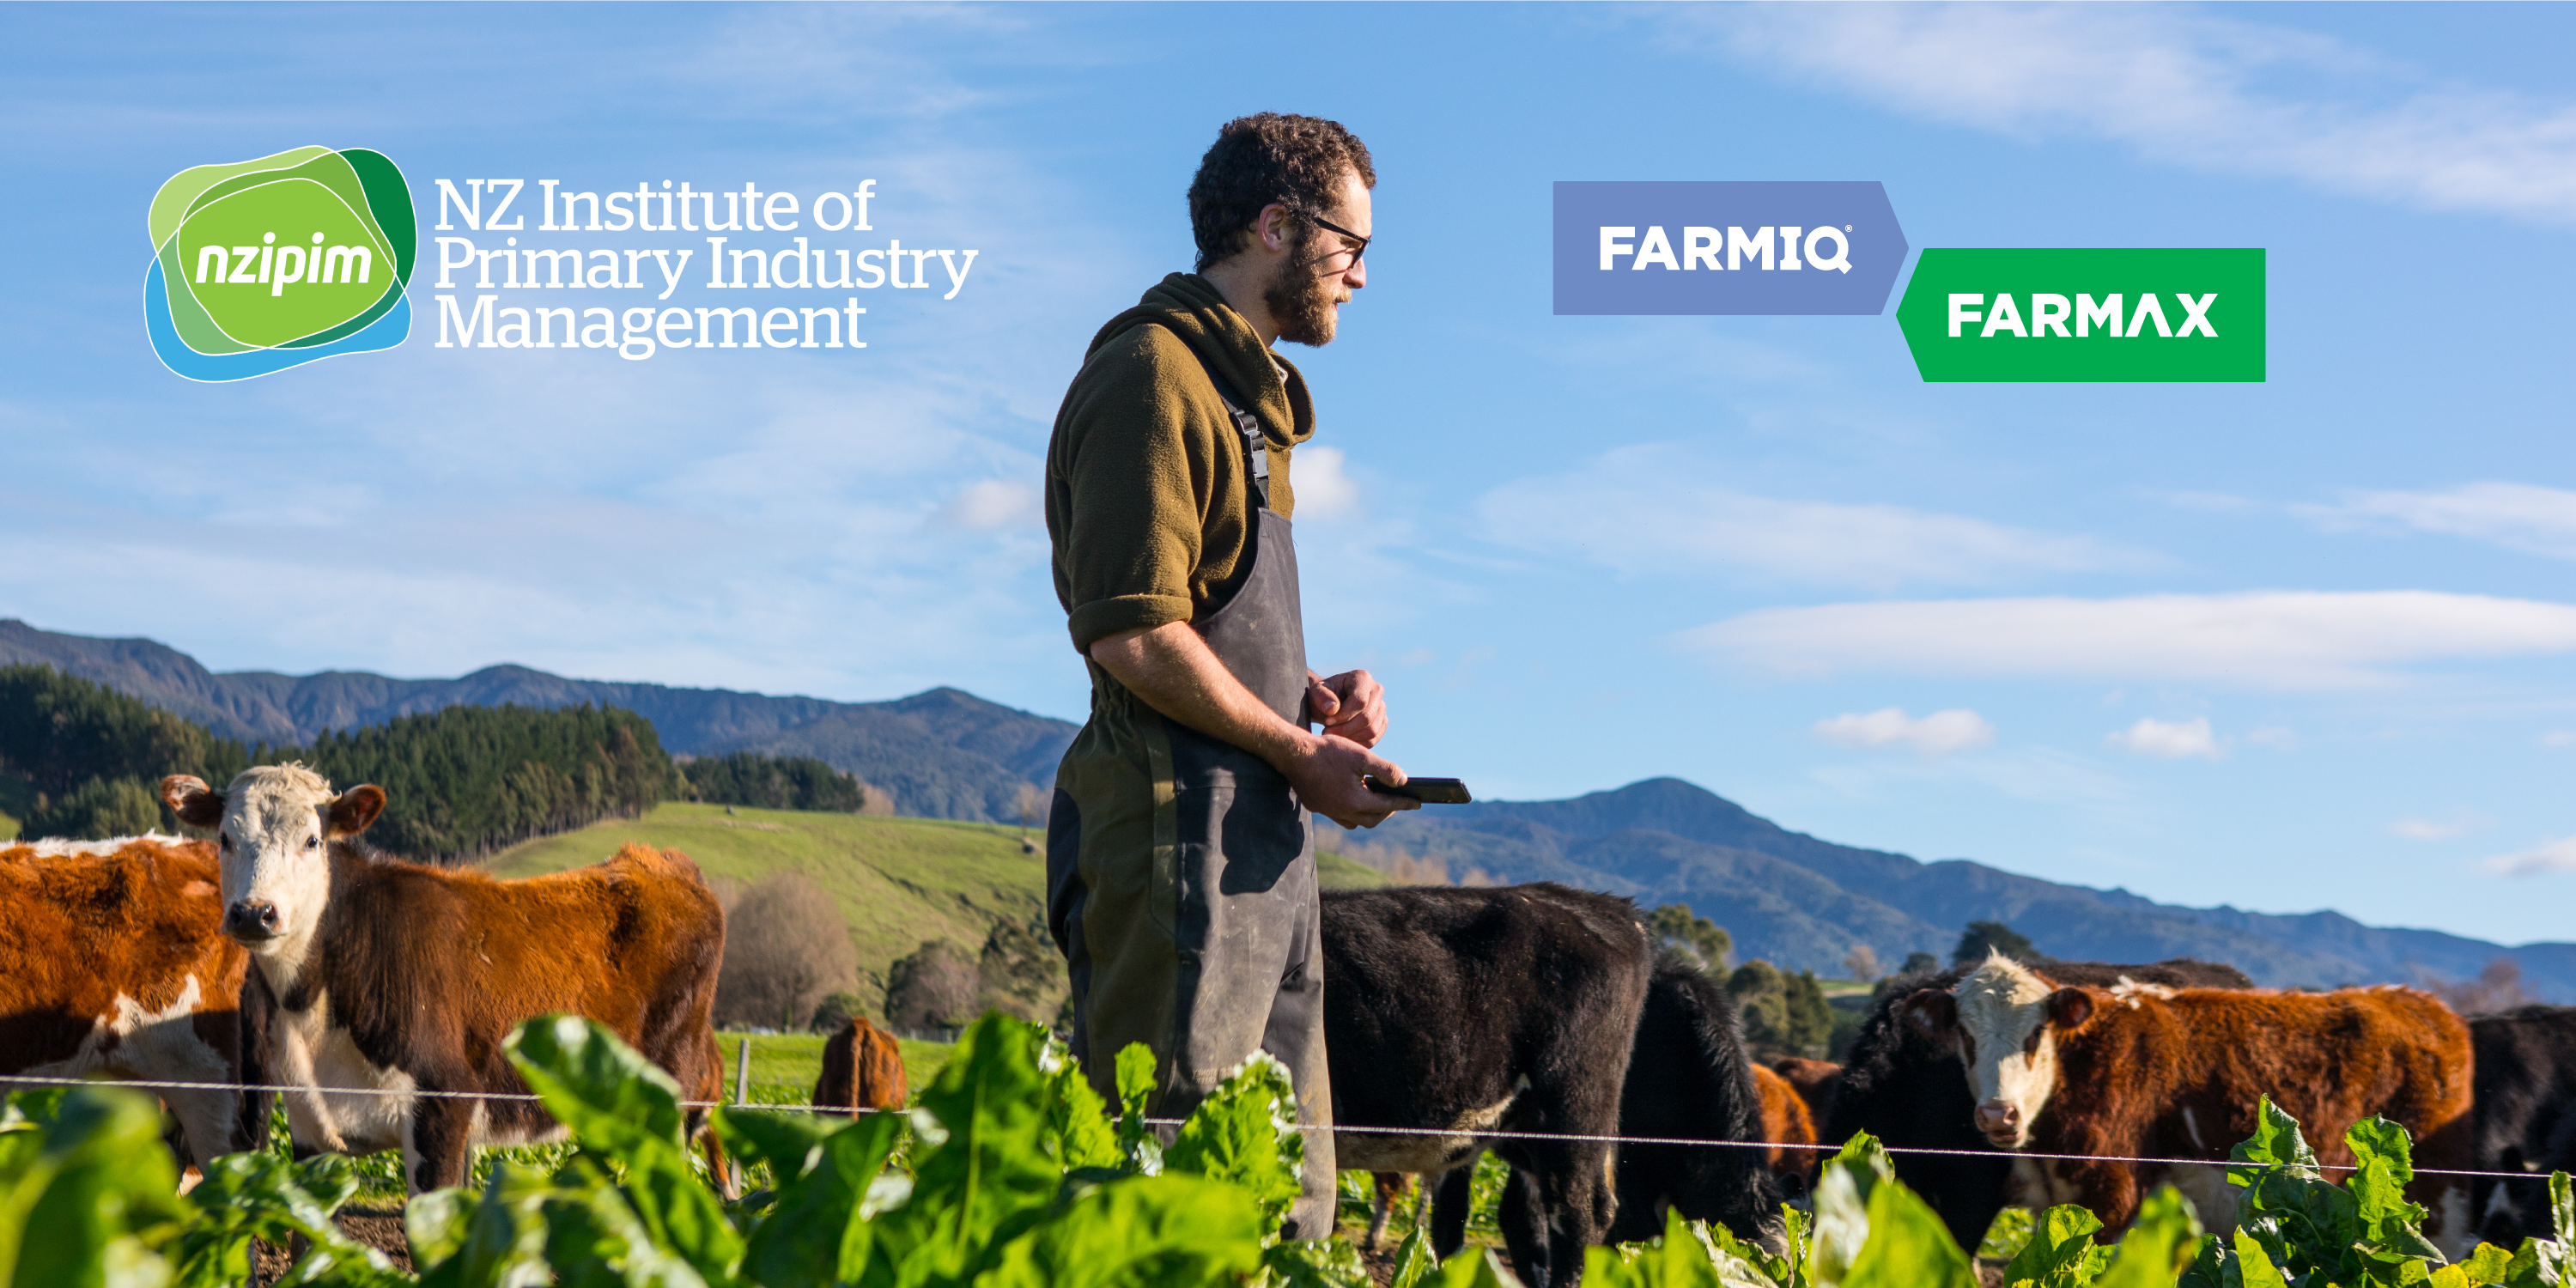 Entries open for this year's FarmIQ Emerging Rural Professional of the Year Award